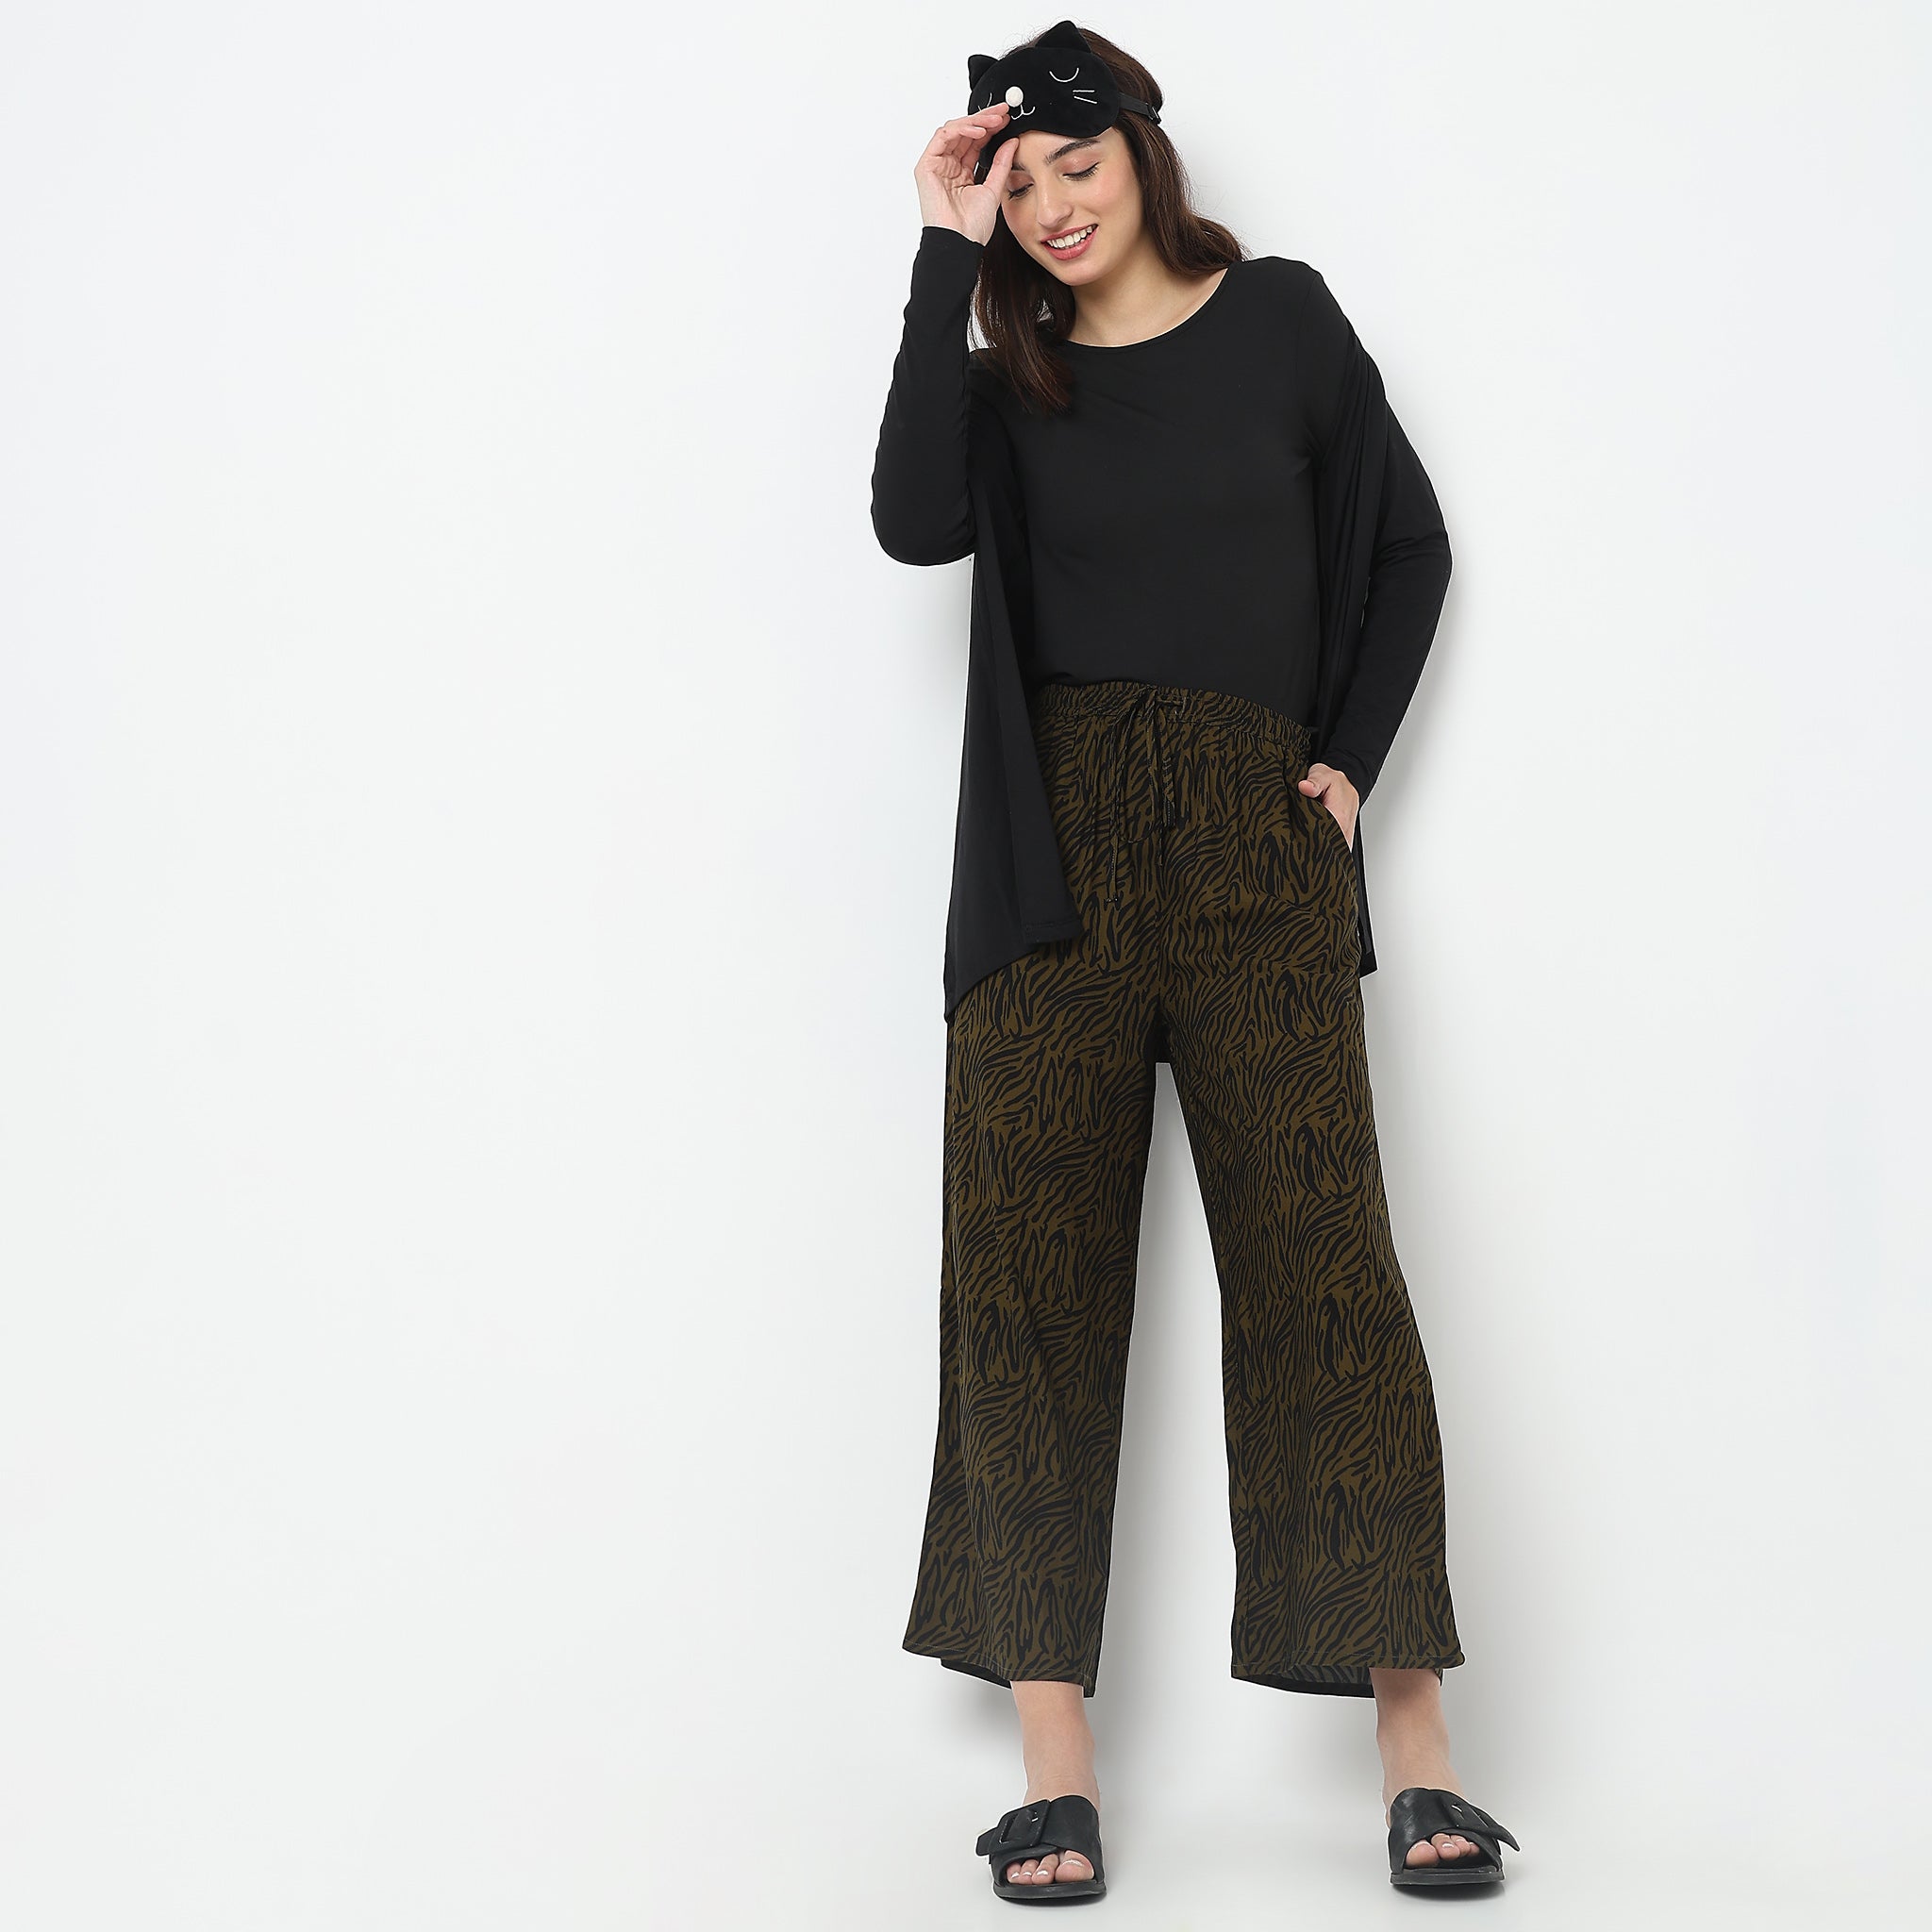 Free Size Palazzo - Buy Peach Palazzo Pants Online In India